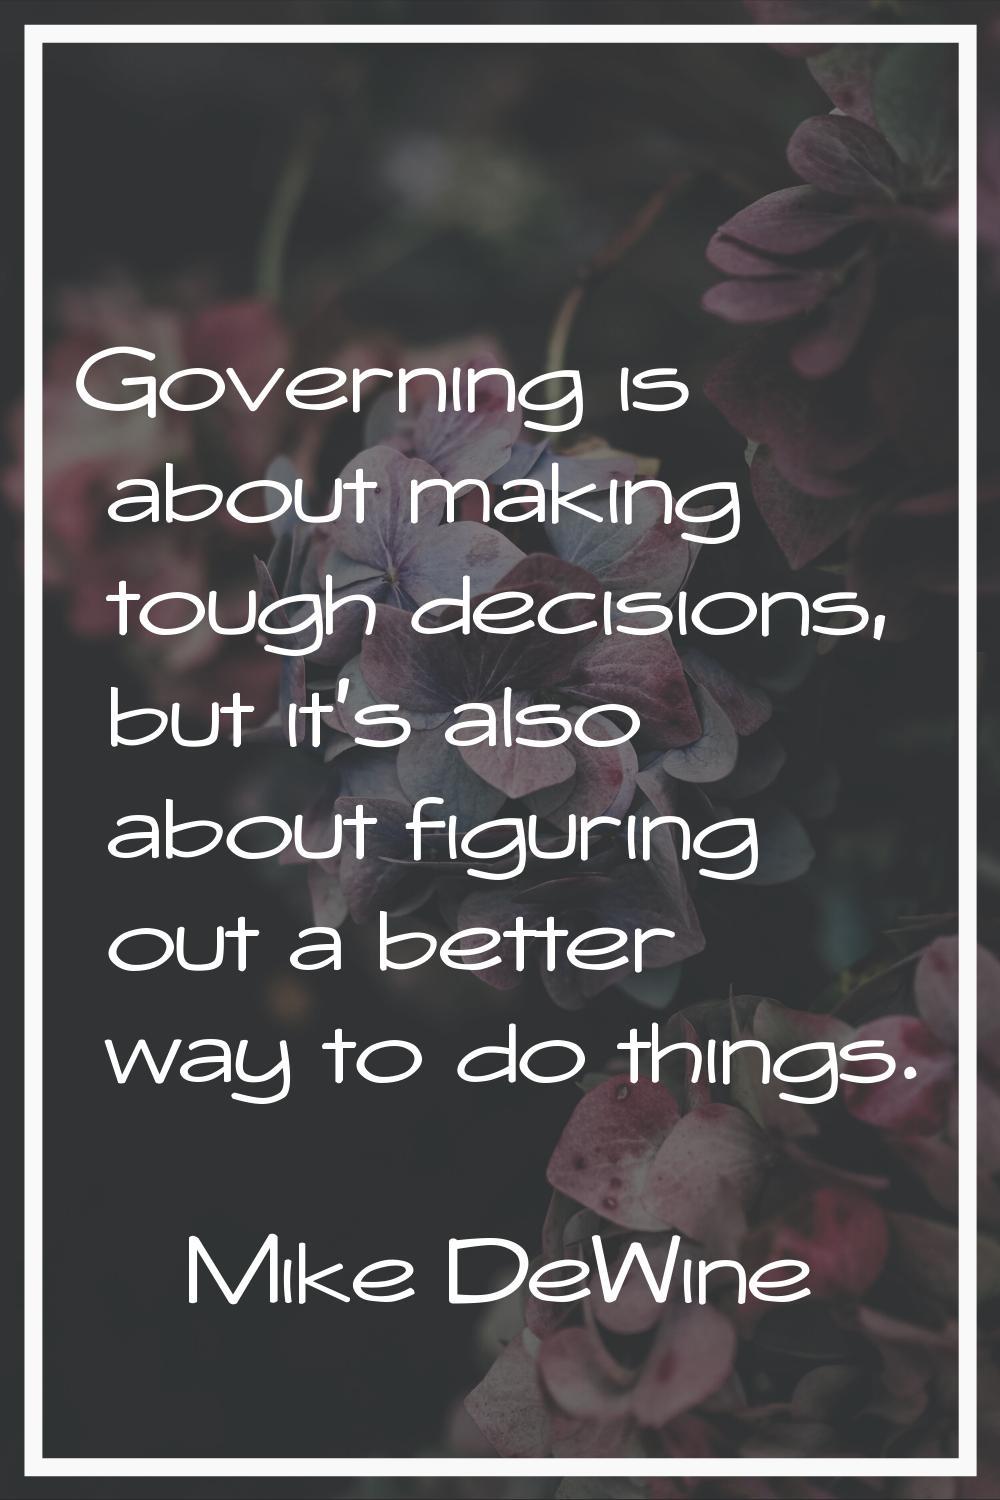 Governing is about making tough decisions, but it's also about figuring out a better way to do thin